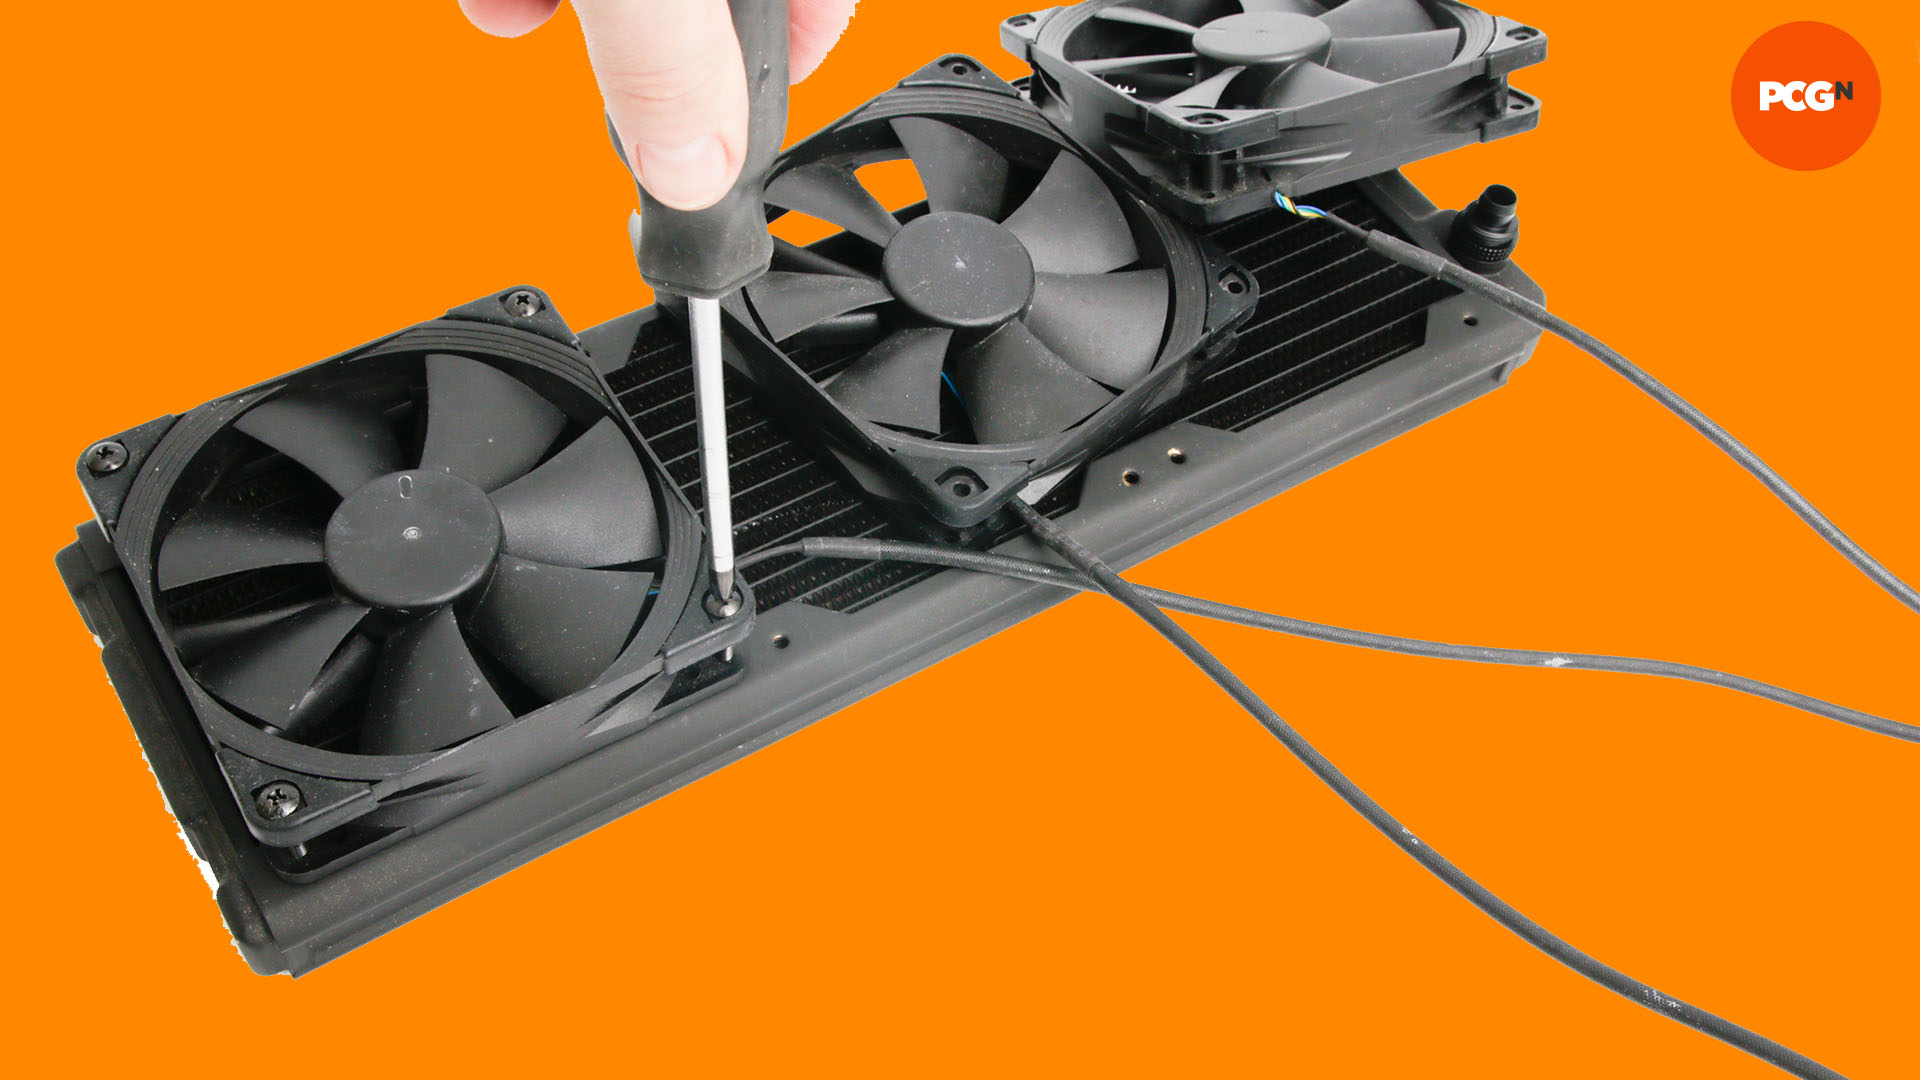 How to water cool your PC: Attach the fans to your radiator